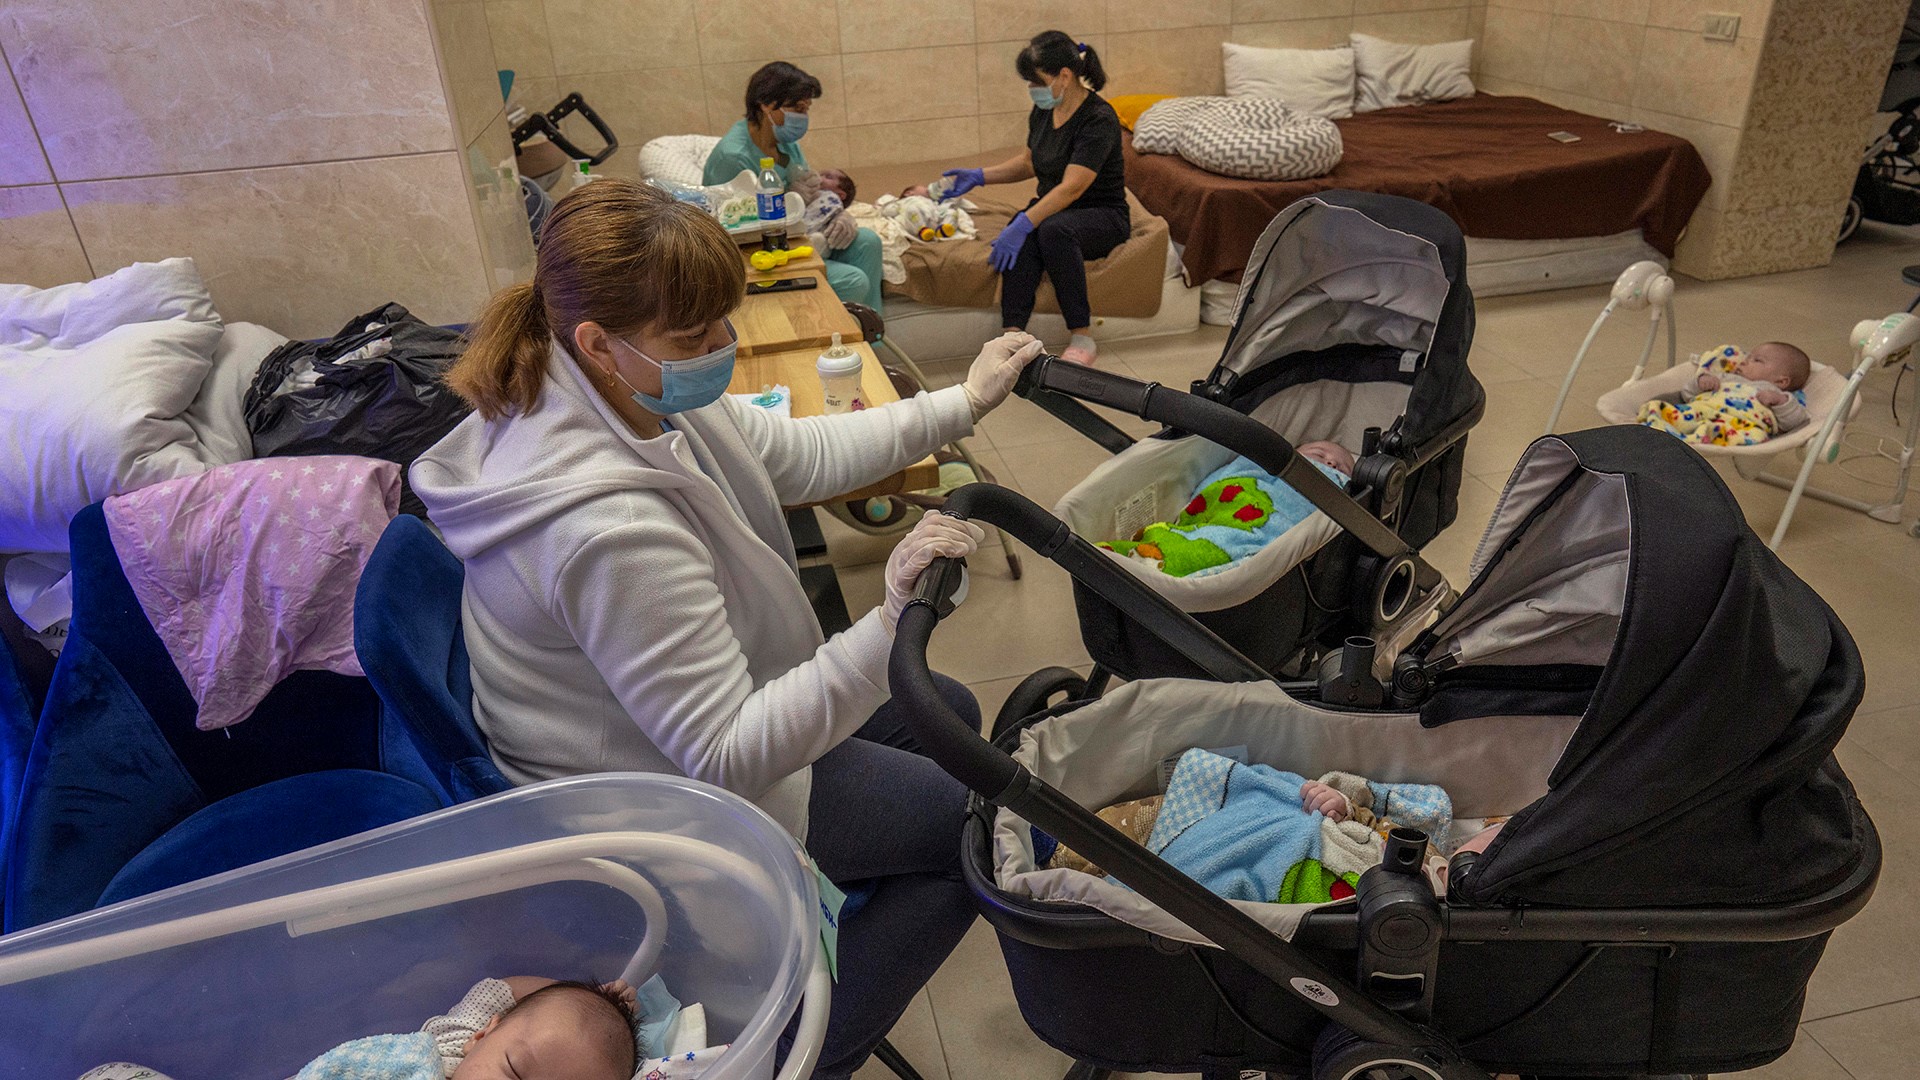 More than 20 newborns are waiting for surrogate parents to collect them in Ukraine capital of Kyiv while under the care of nurses in a makeshift nursery.